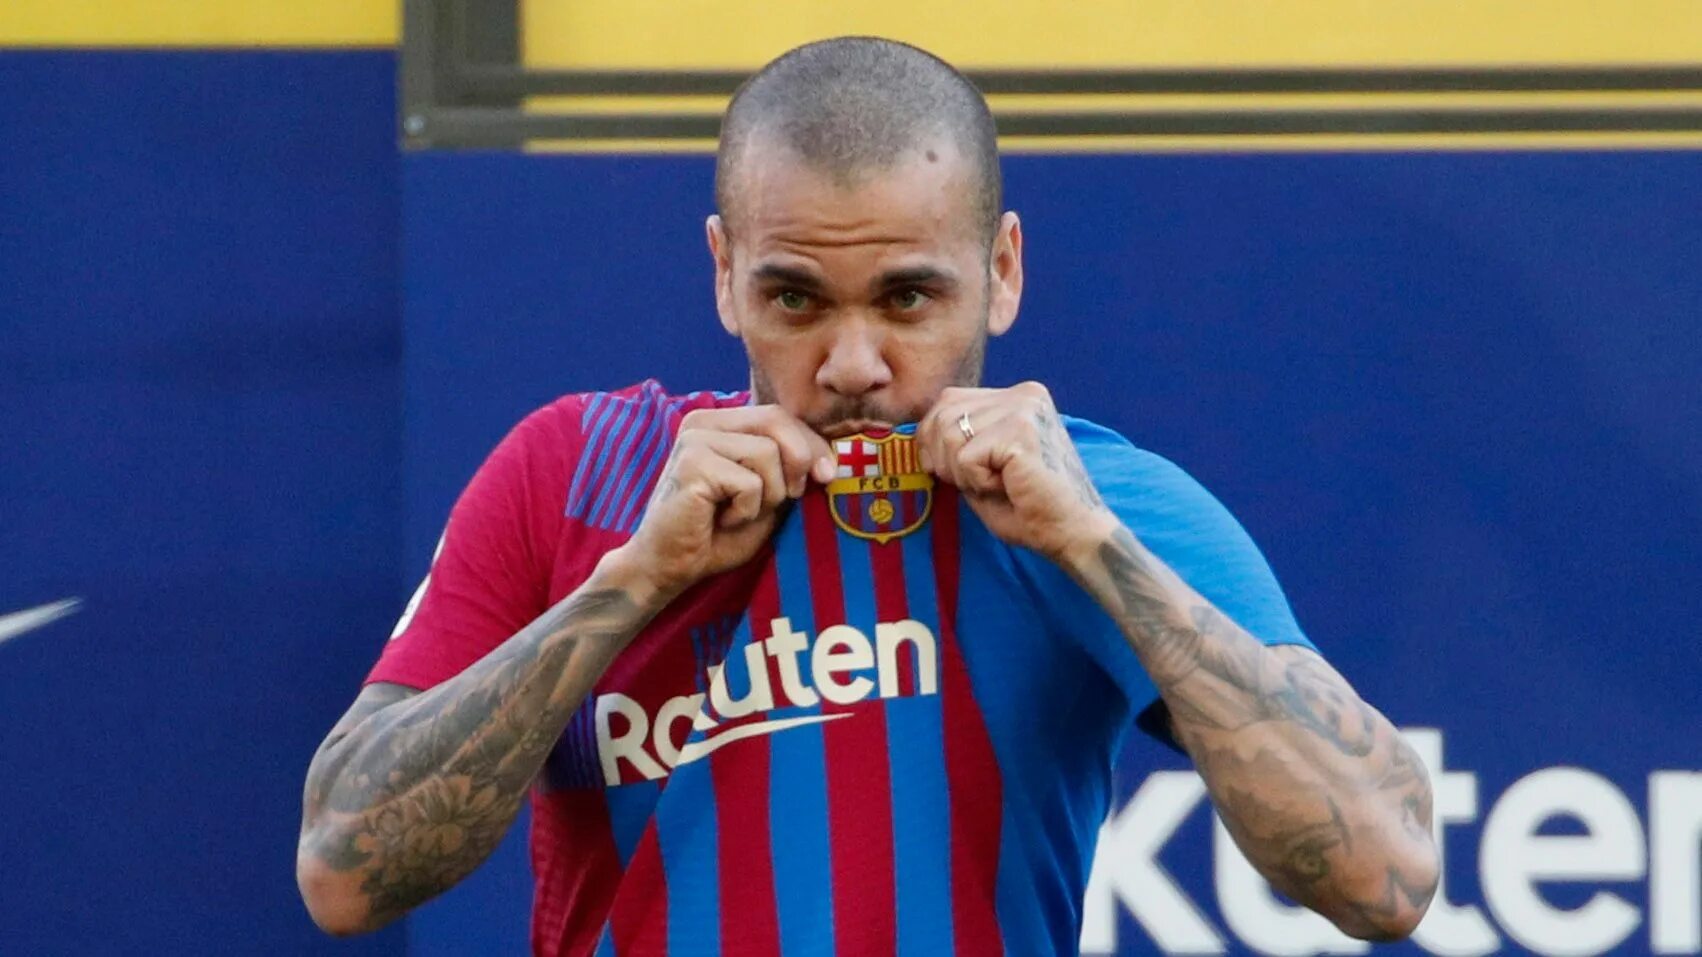 Дани Алвес в тюрьме. Дани Алвес в тюрьме фото. Dani Alves Barca. Дани Алвес 2019 год фото.